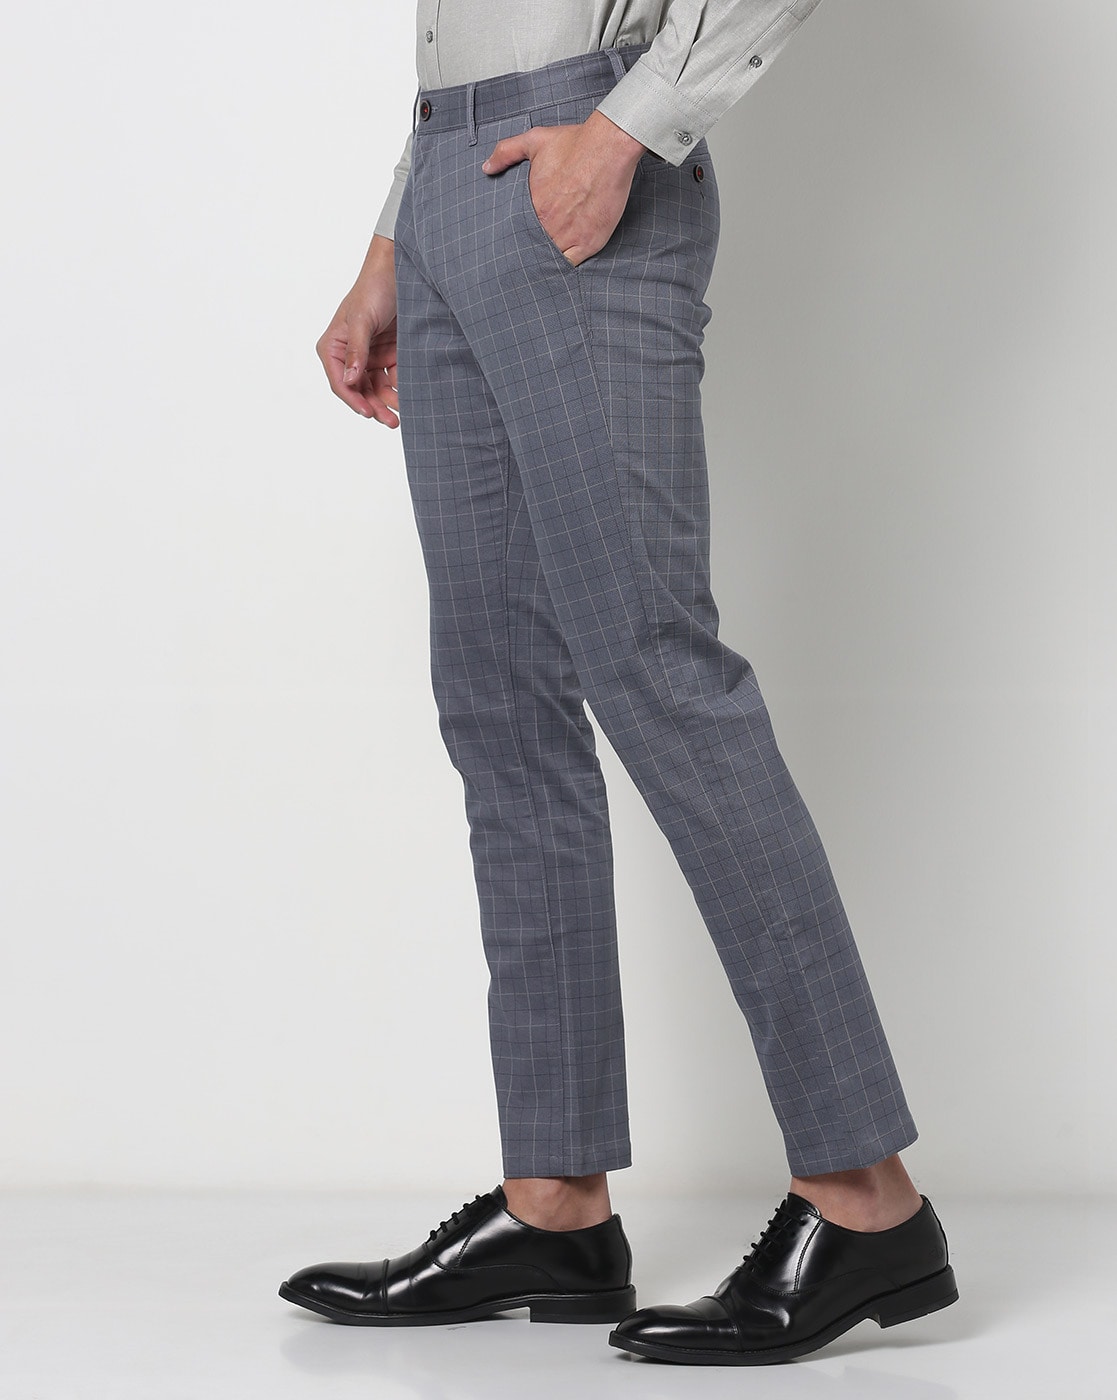 Slim Fit trousers - Grey/Checked - Men | H&M